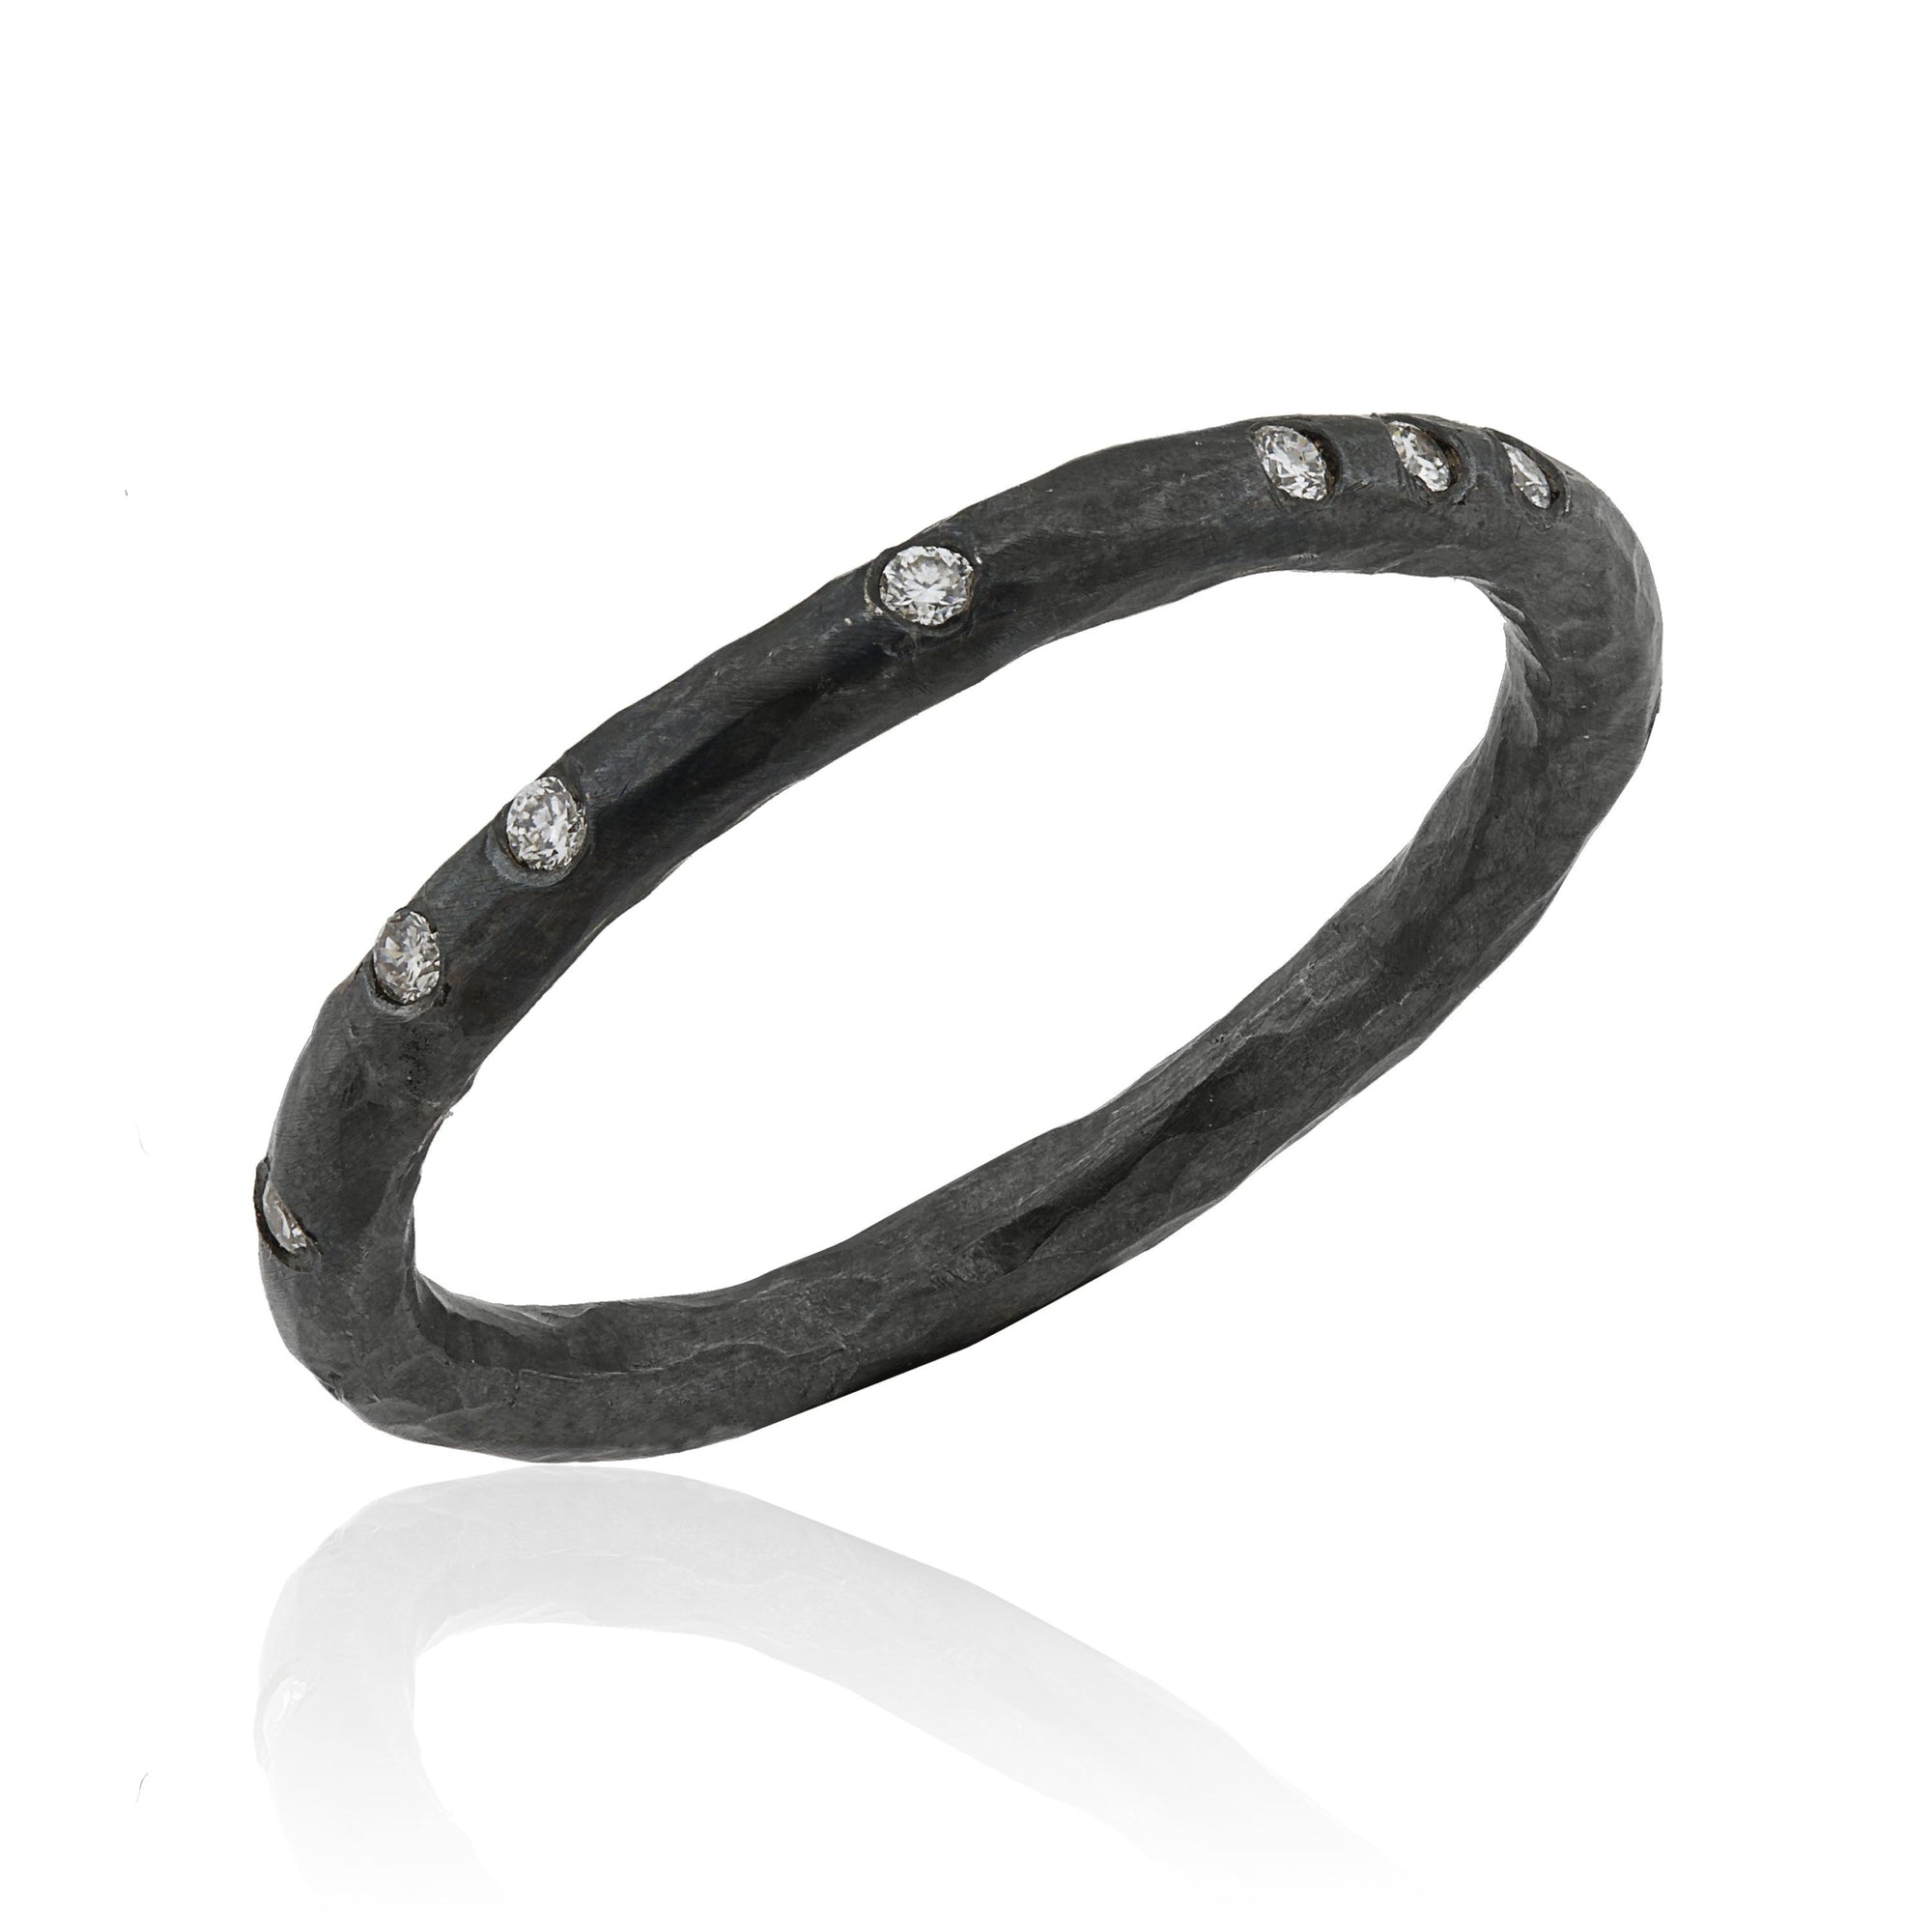 Lika Behar Oxidized Sterling Silver Band with Diamond Accents